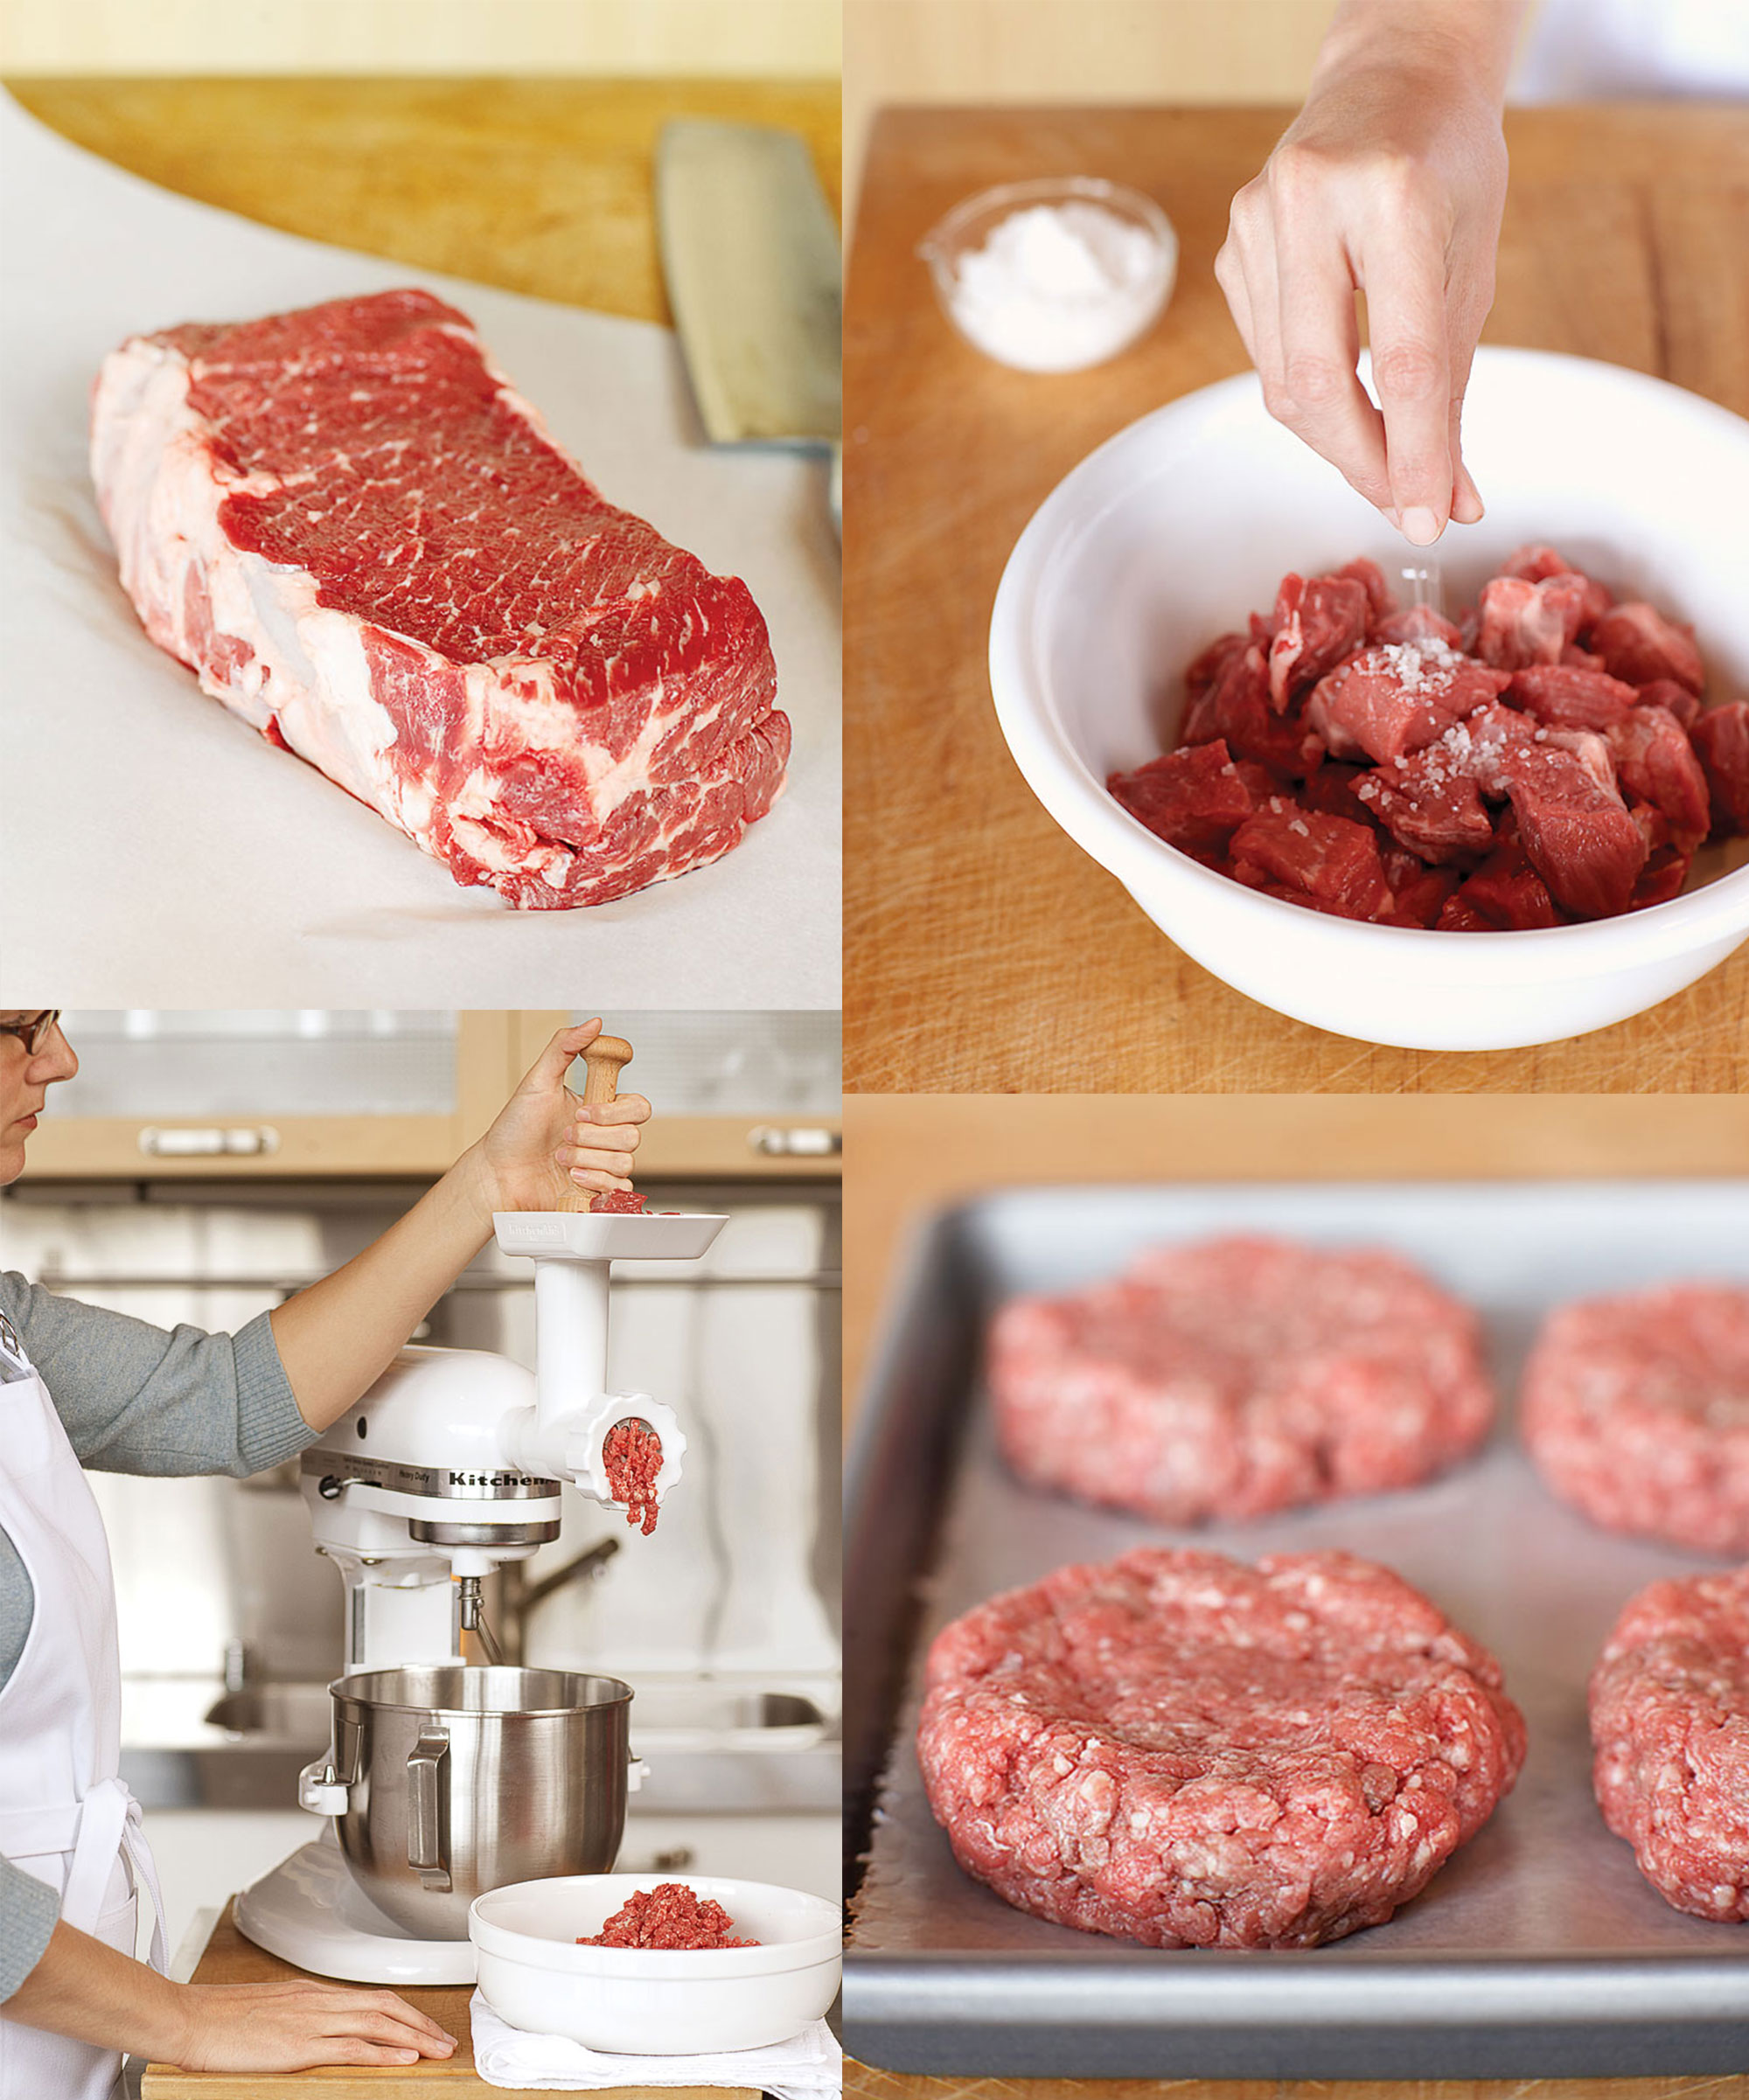 Grinding Meat in Your Home Kitchen